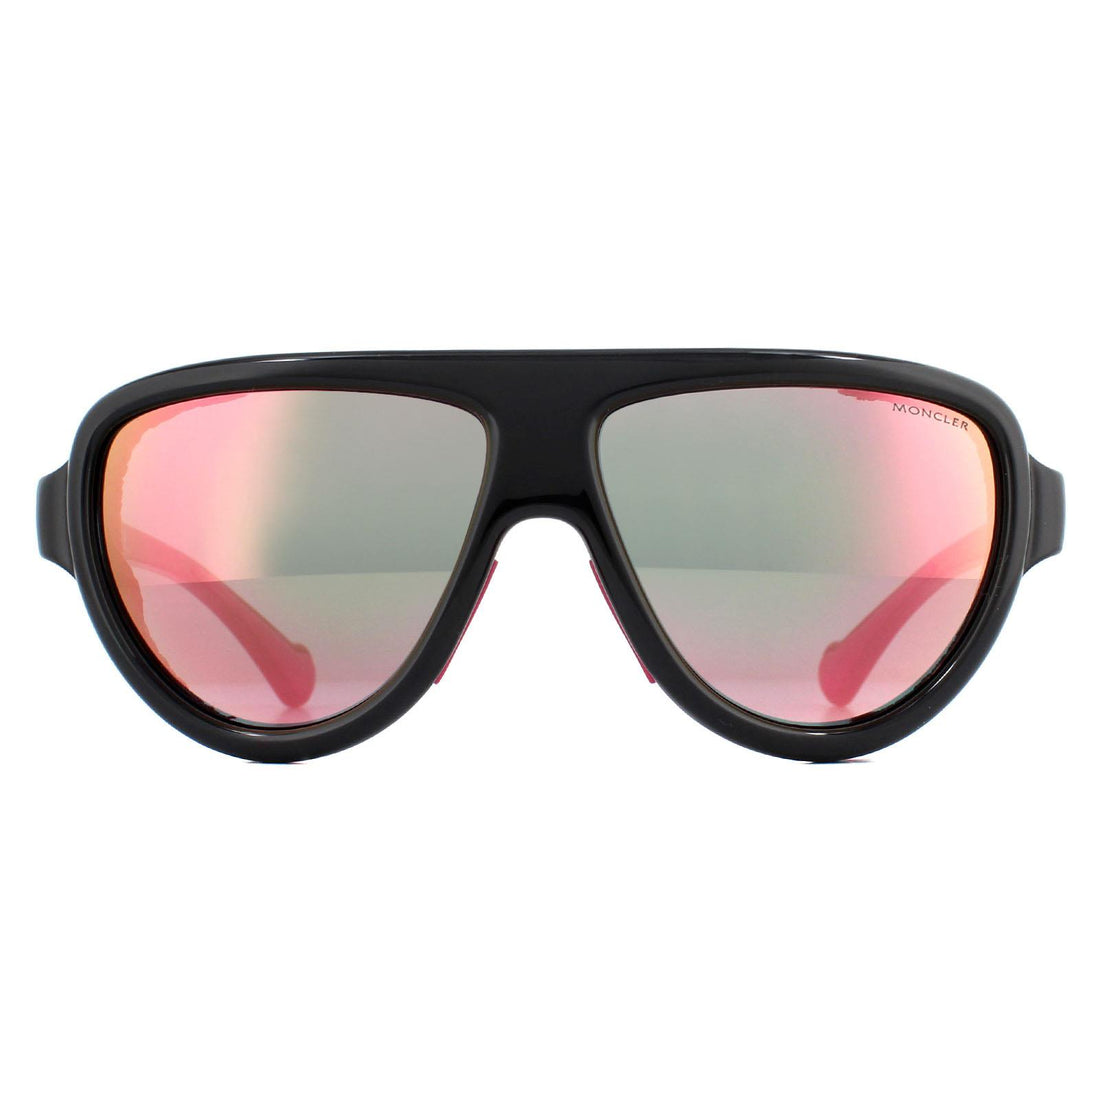 Moncler Sunglasses ML0089 01Z Shiny Black with Pink Leather Blue 